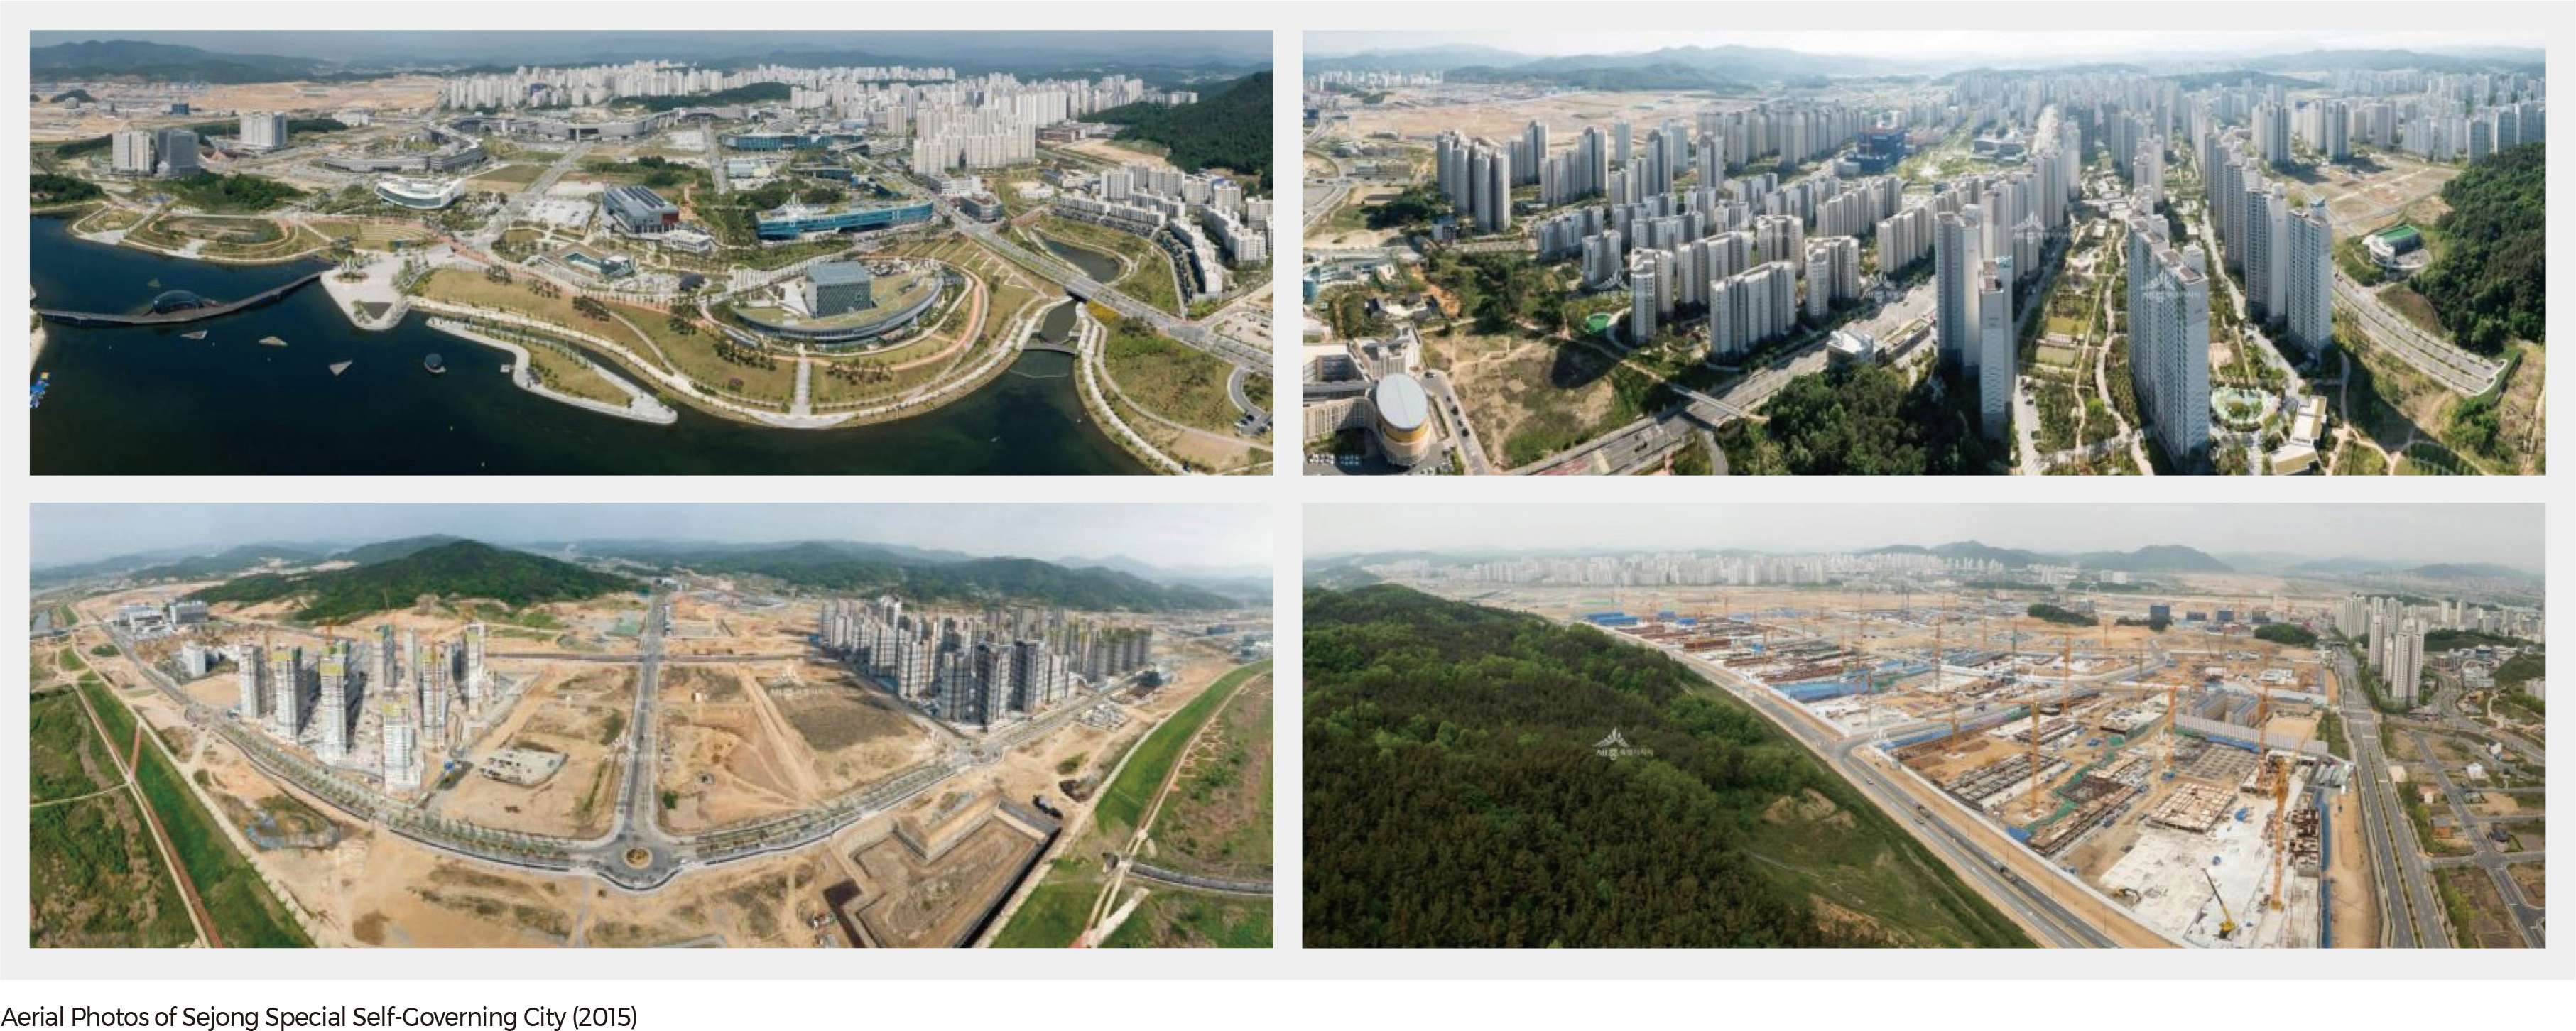 Aerial Photos of Sejong Special Self-Governing City (2015)